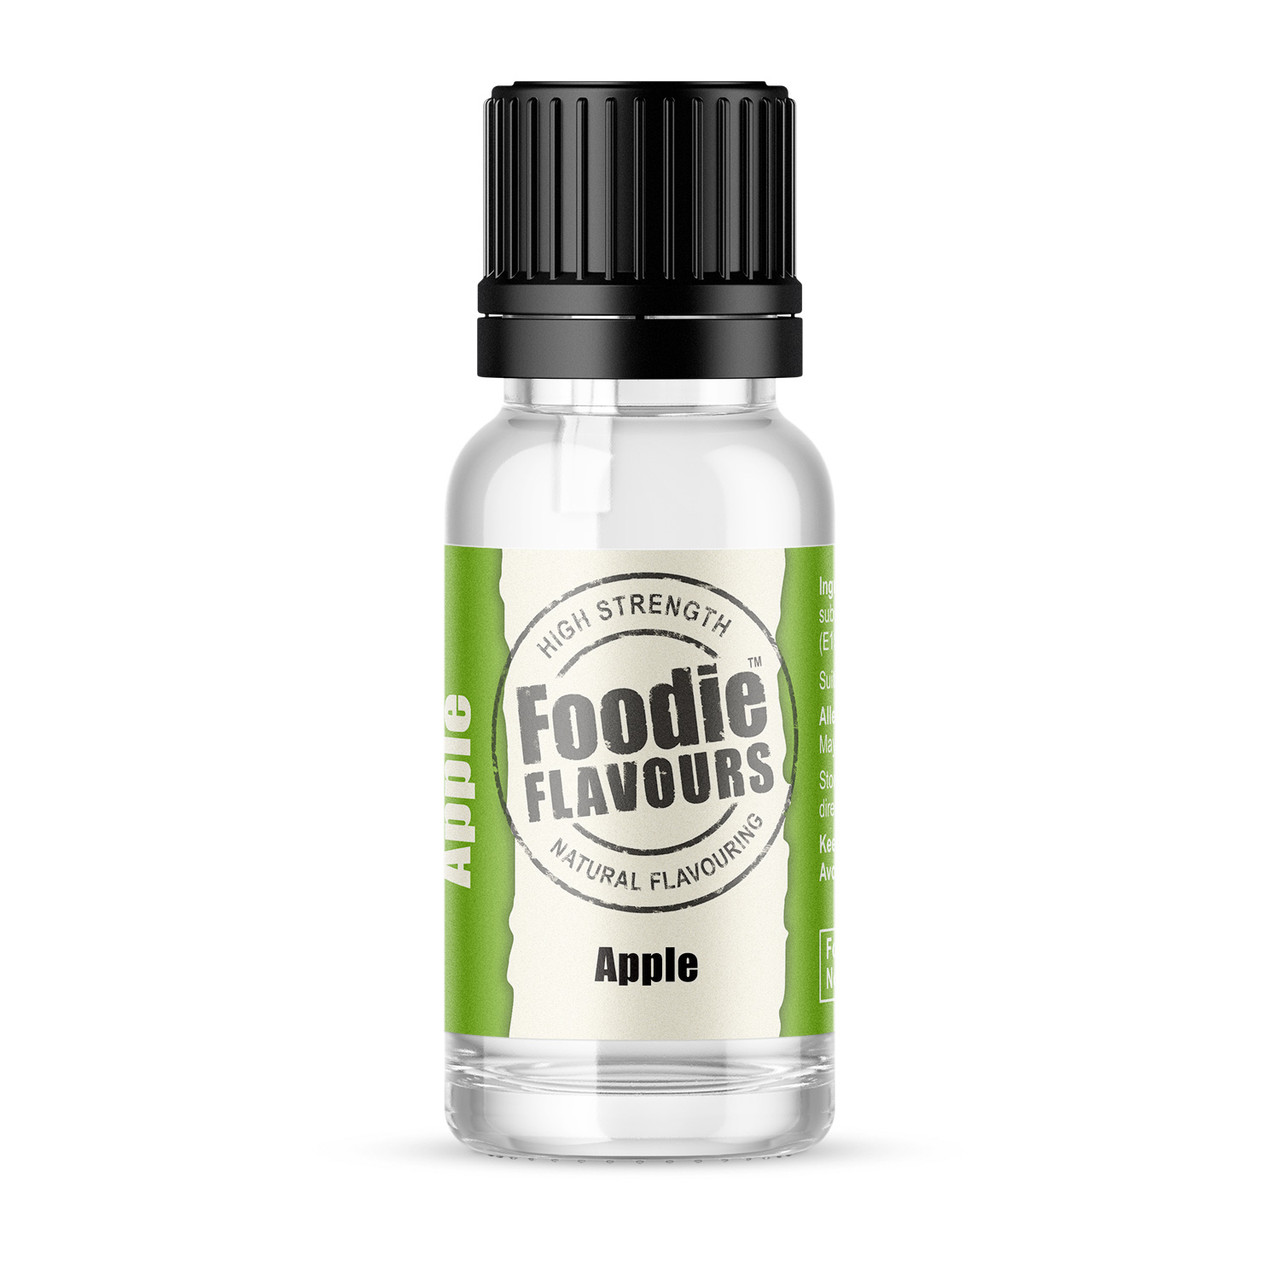 Foodie Flavours - Apple Natural Flavouring - 15ml 